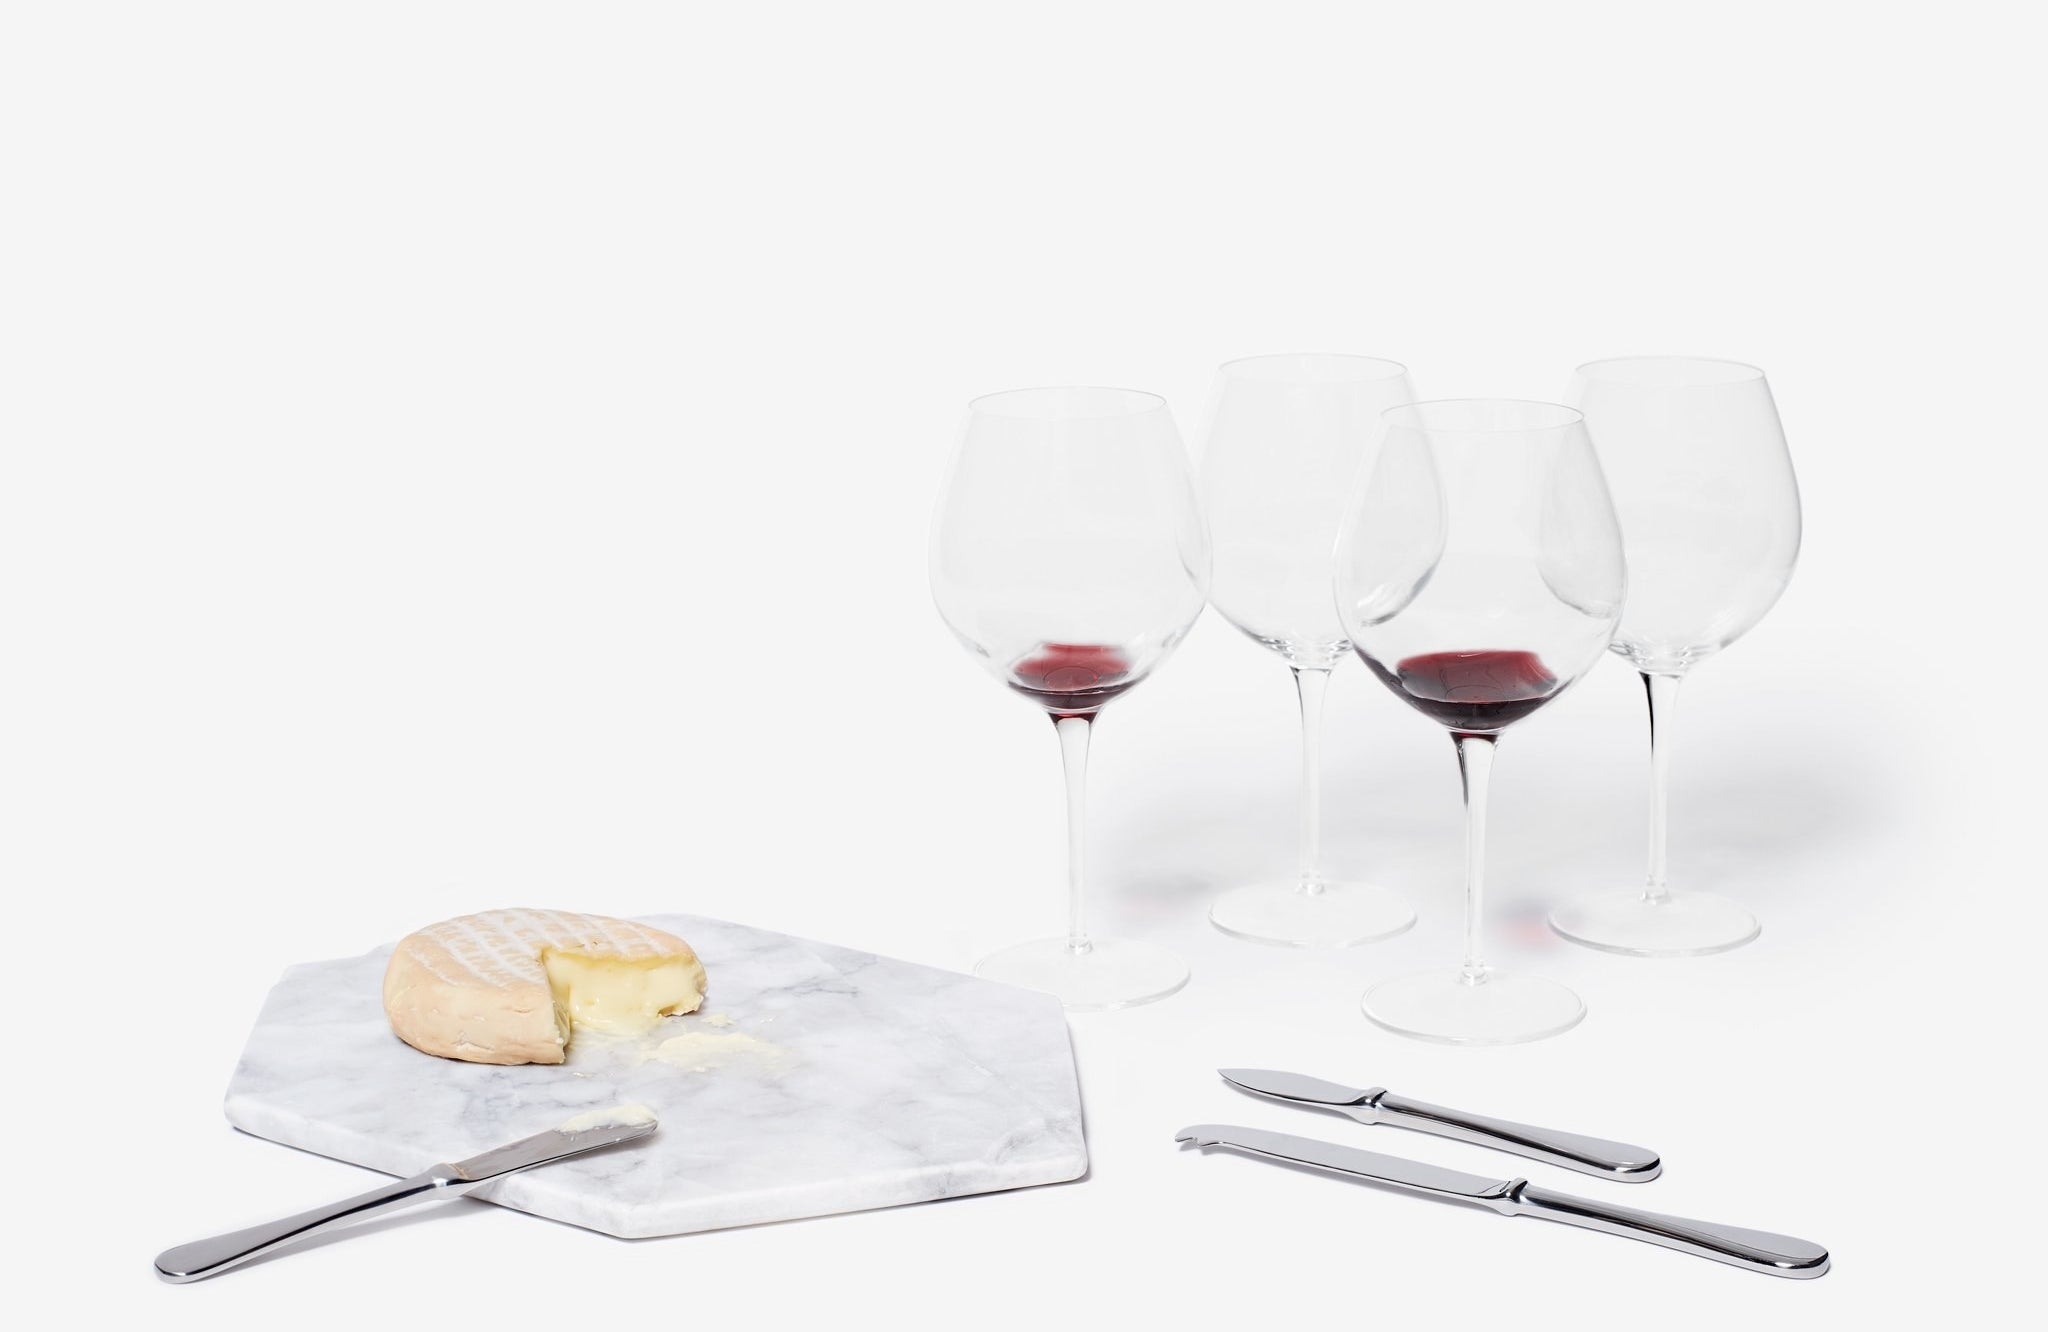 marble cheeseboard with brie wheel next to wine glasses